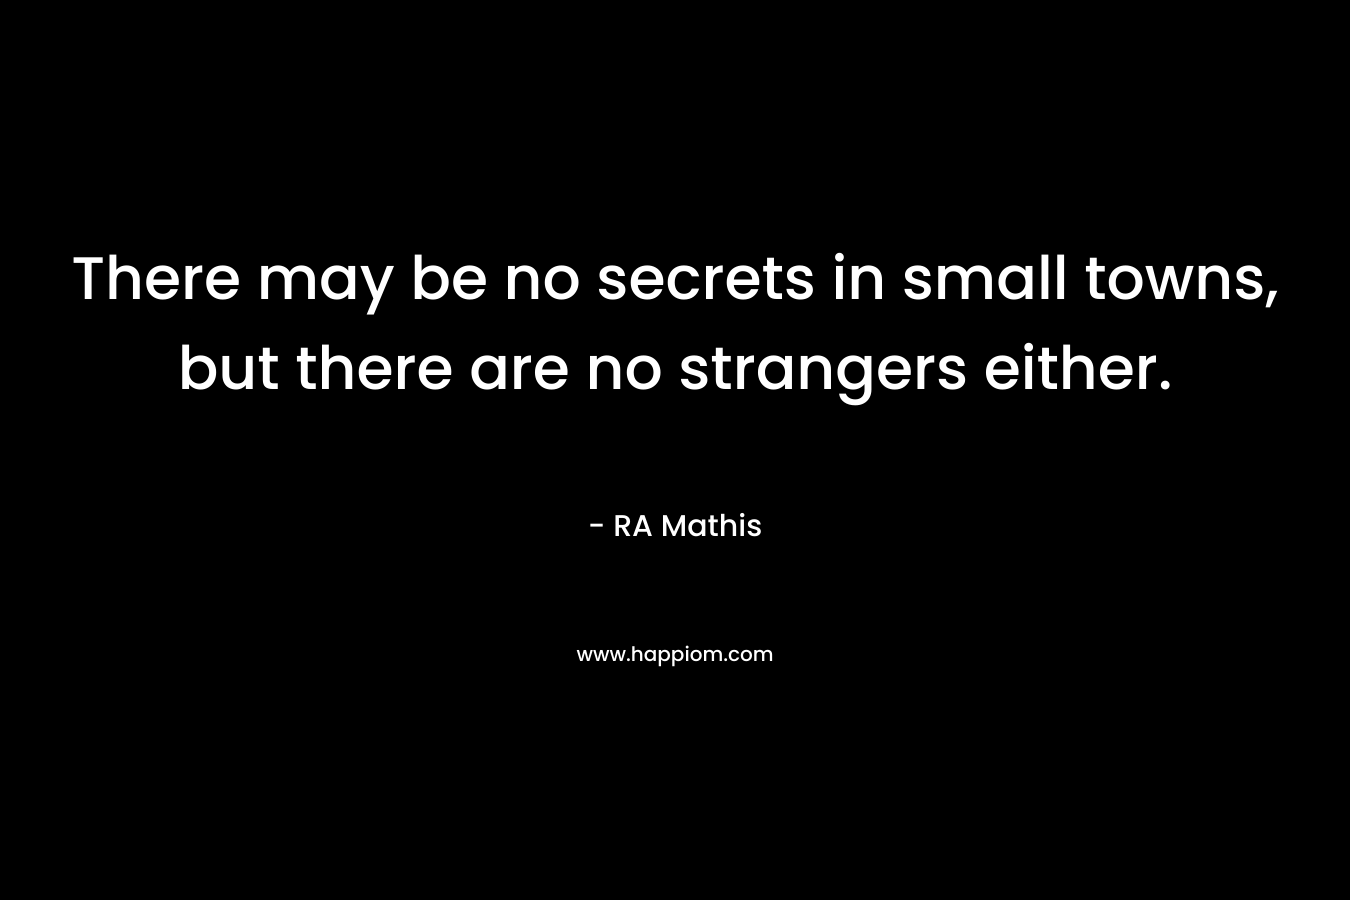 There may be no secrets in small towns, but there are no strangers either.